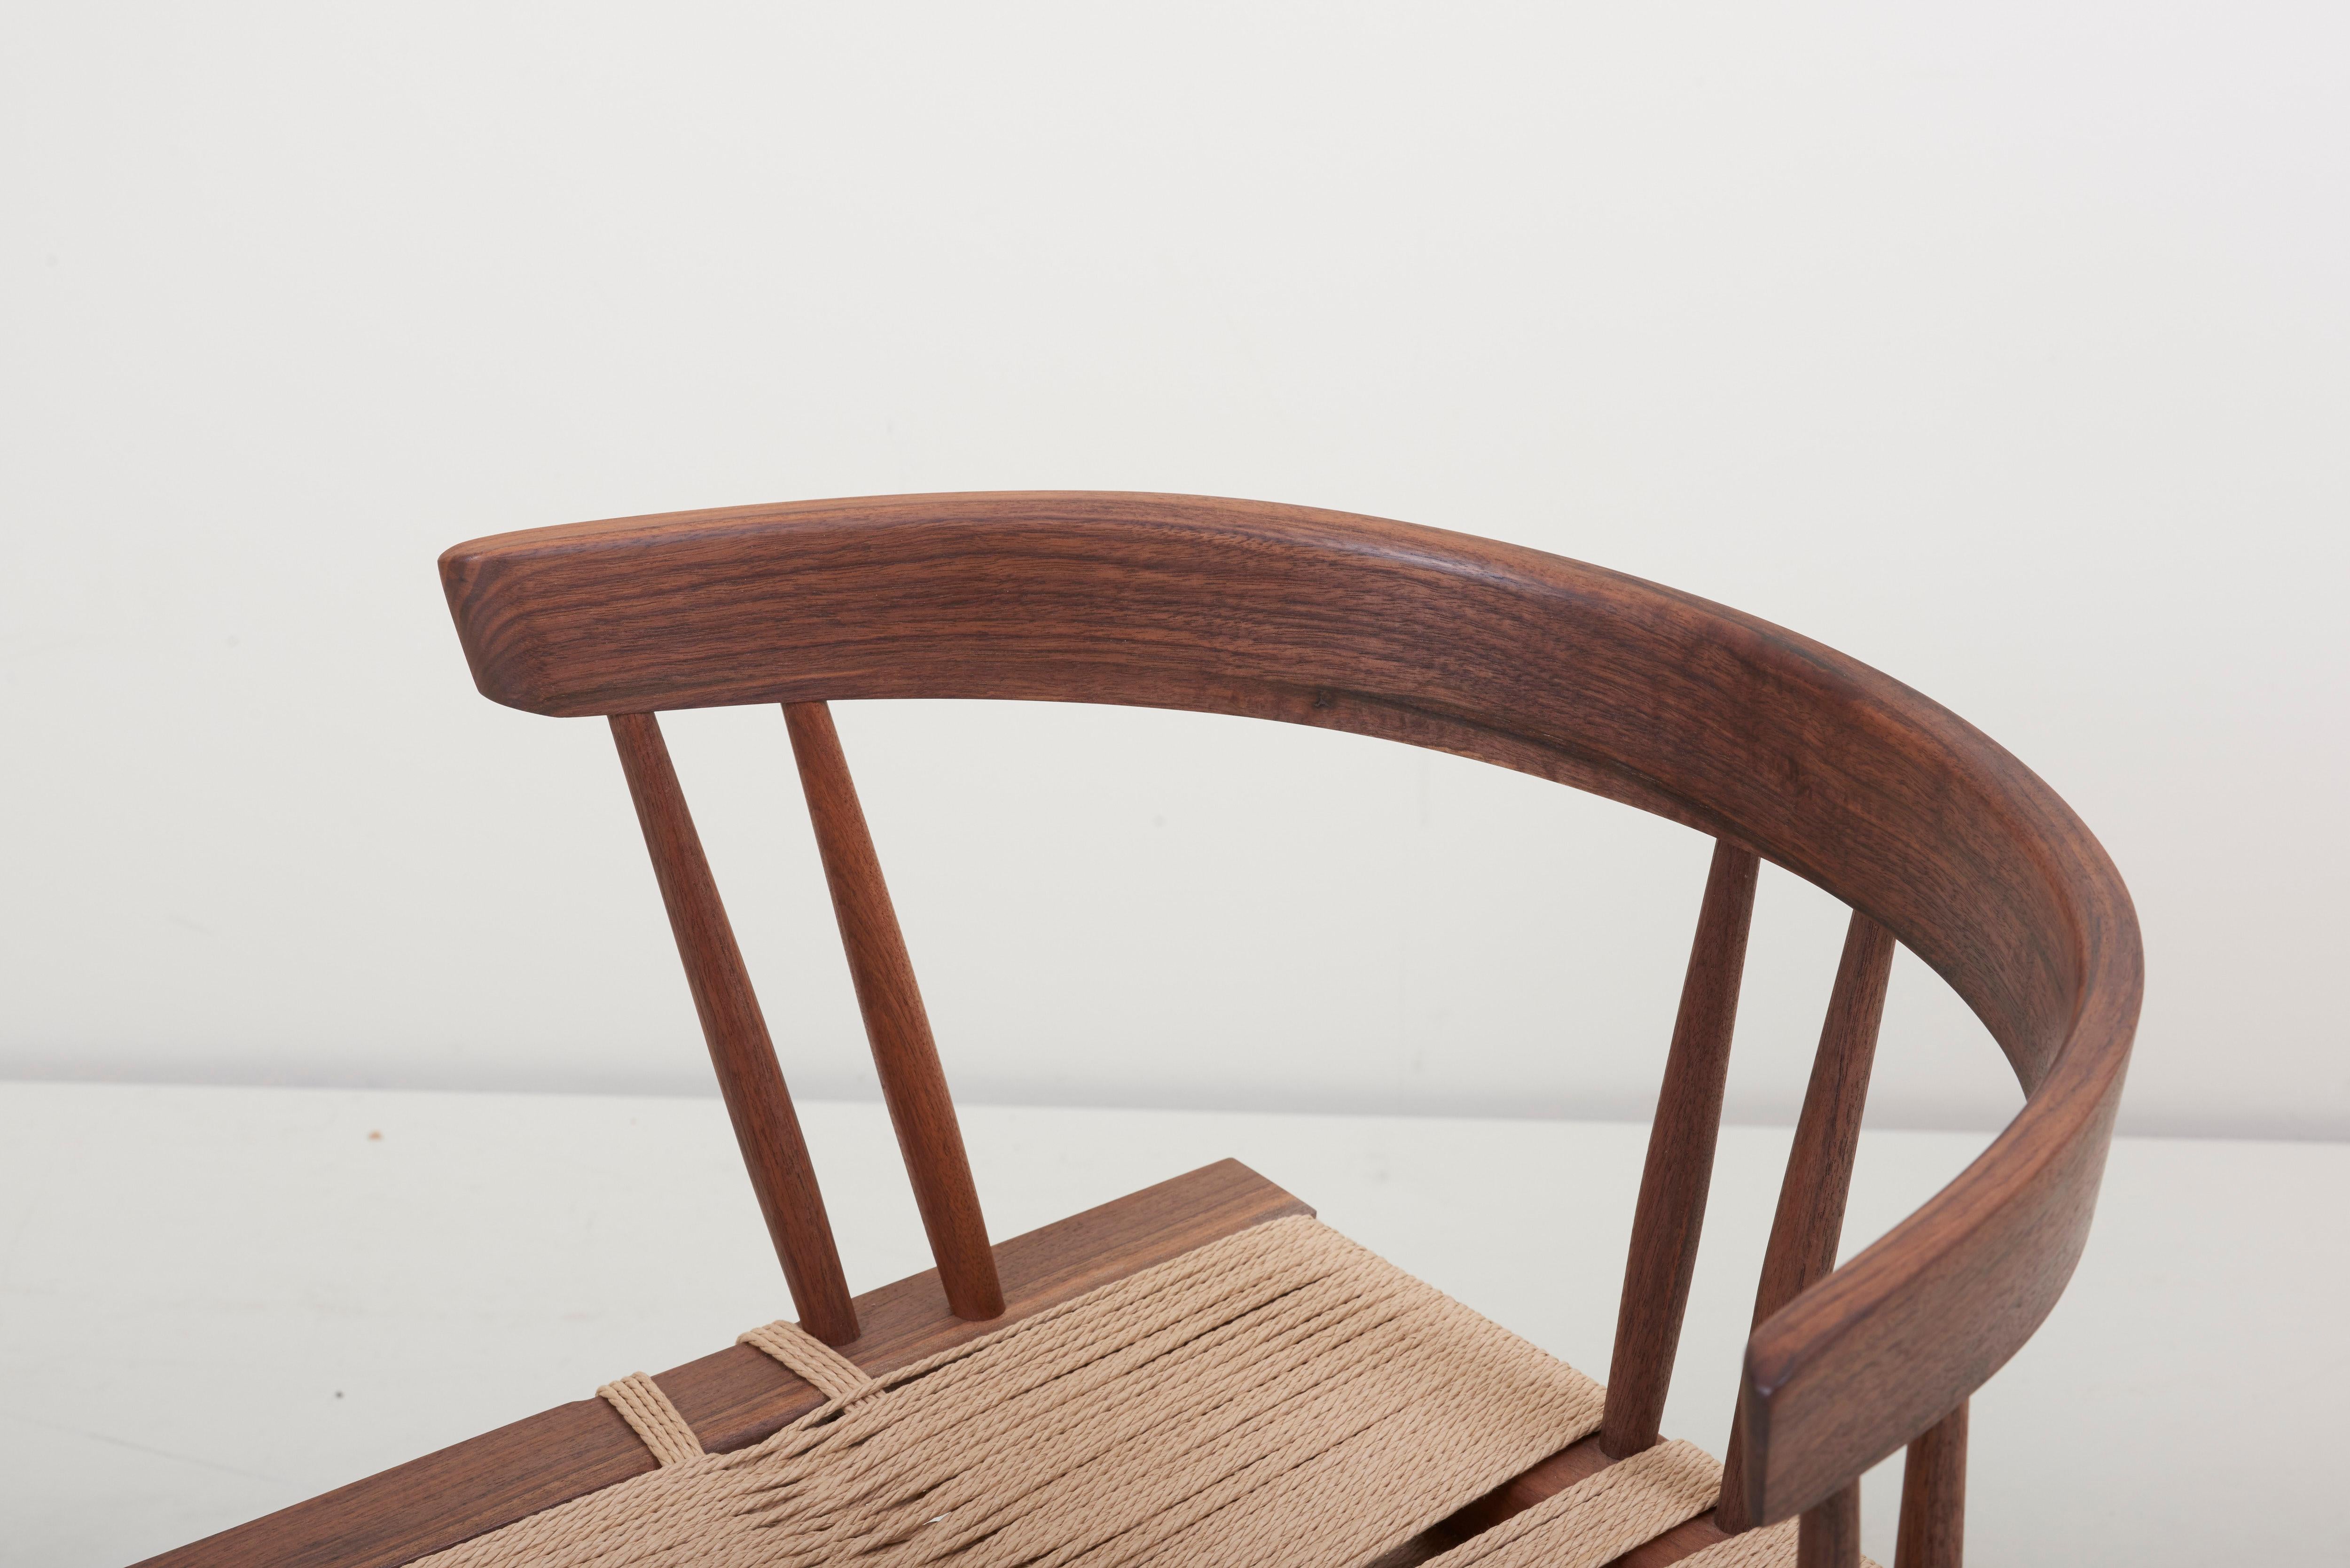 Set of Six Grass Seated Dining Chairs by George Nakashima Studio, US - 2019 11